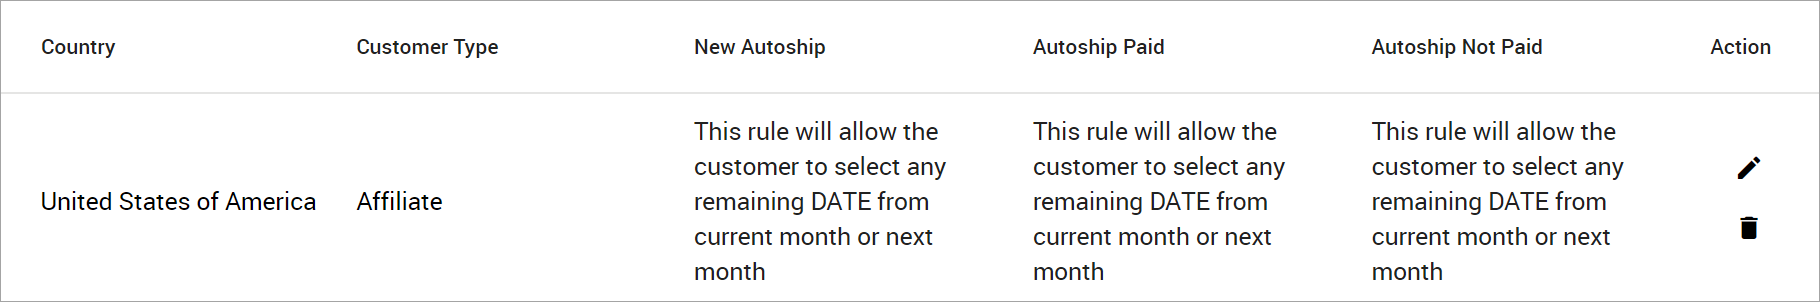 New AutoShip rules